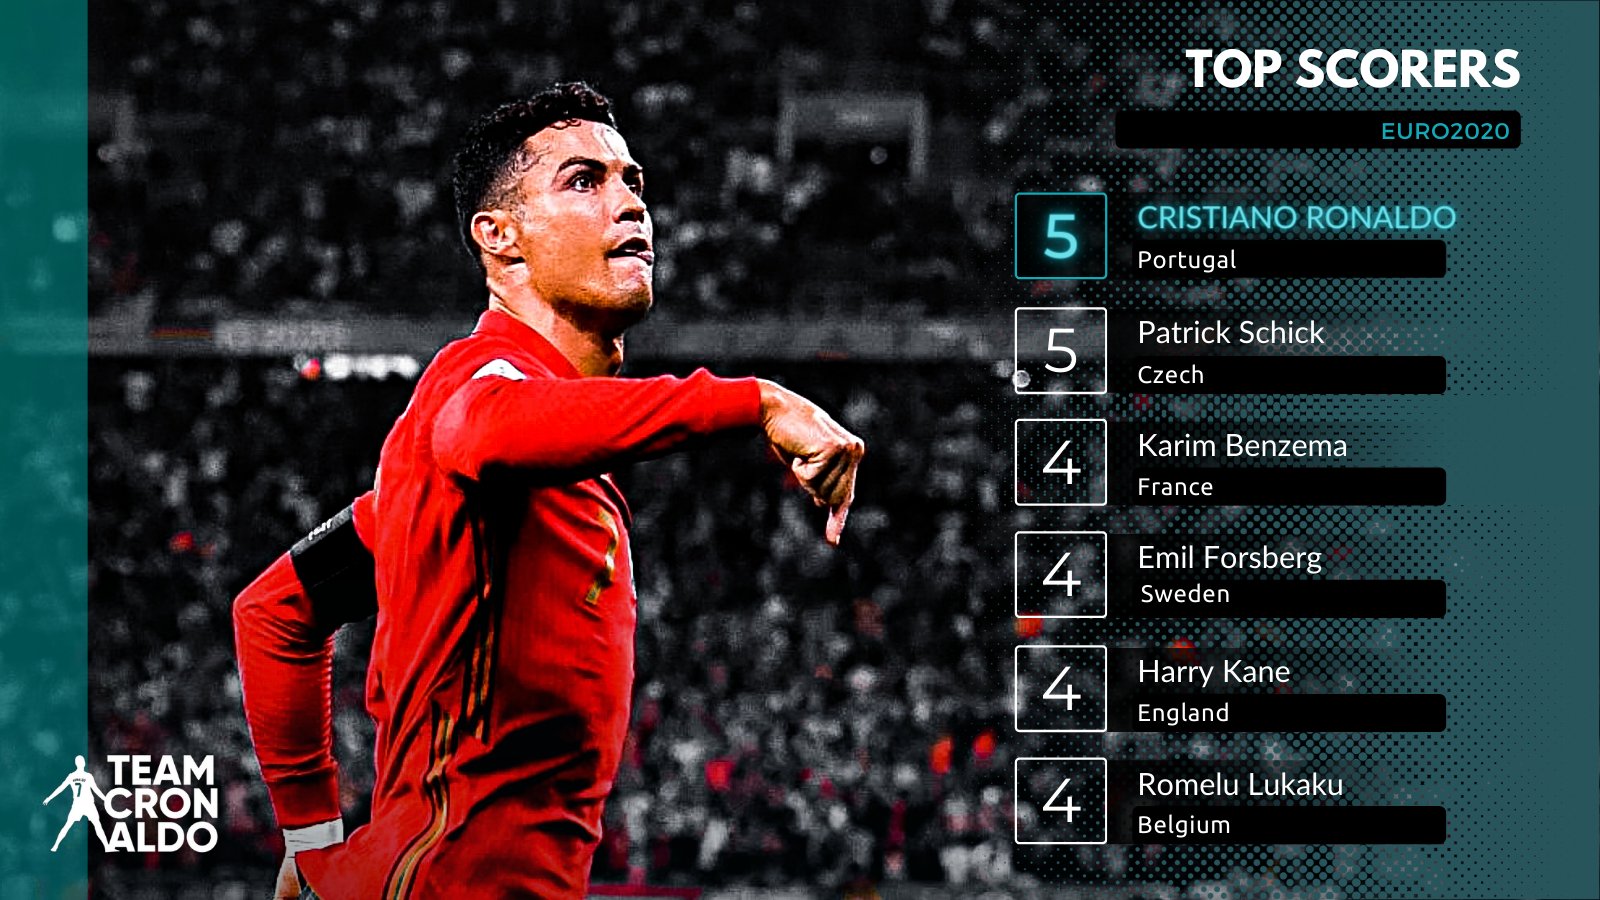 TCR. on Twitter: "🥇EURO2020 official top scorers Cristiano Ronaldo ended the as the player with: Most goals (5) ✓ goal contributions (6) ✓ Highest rated player He's only